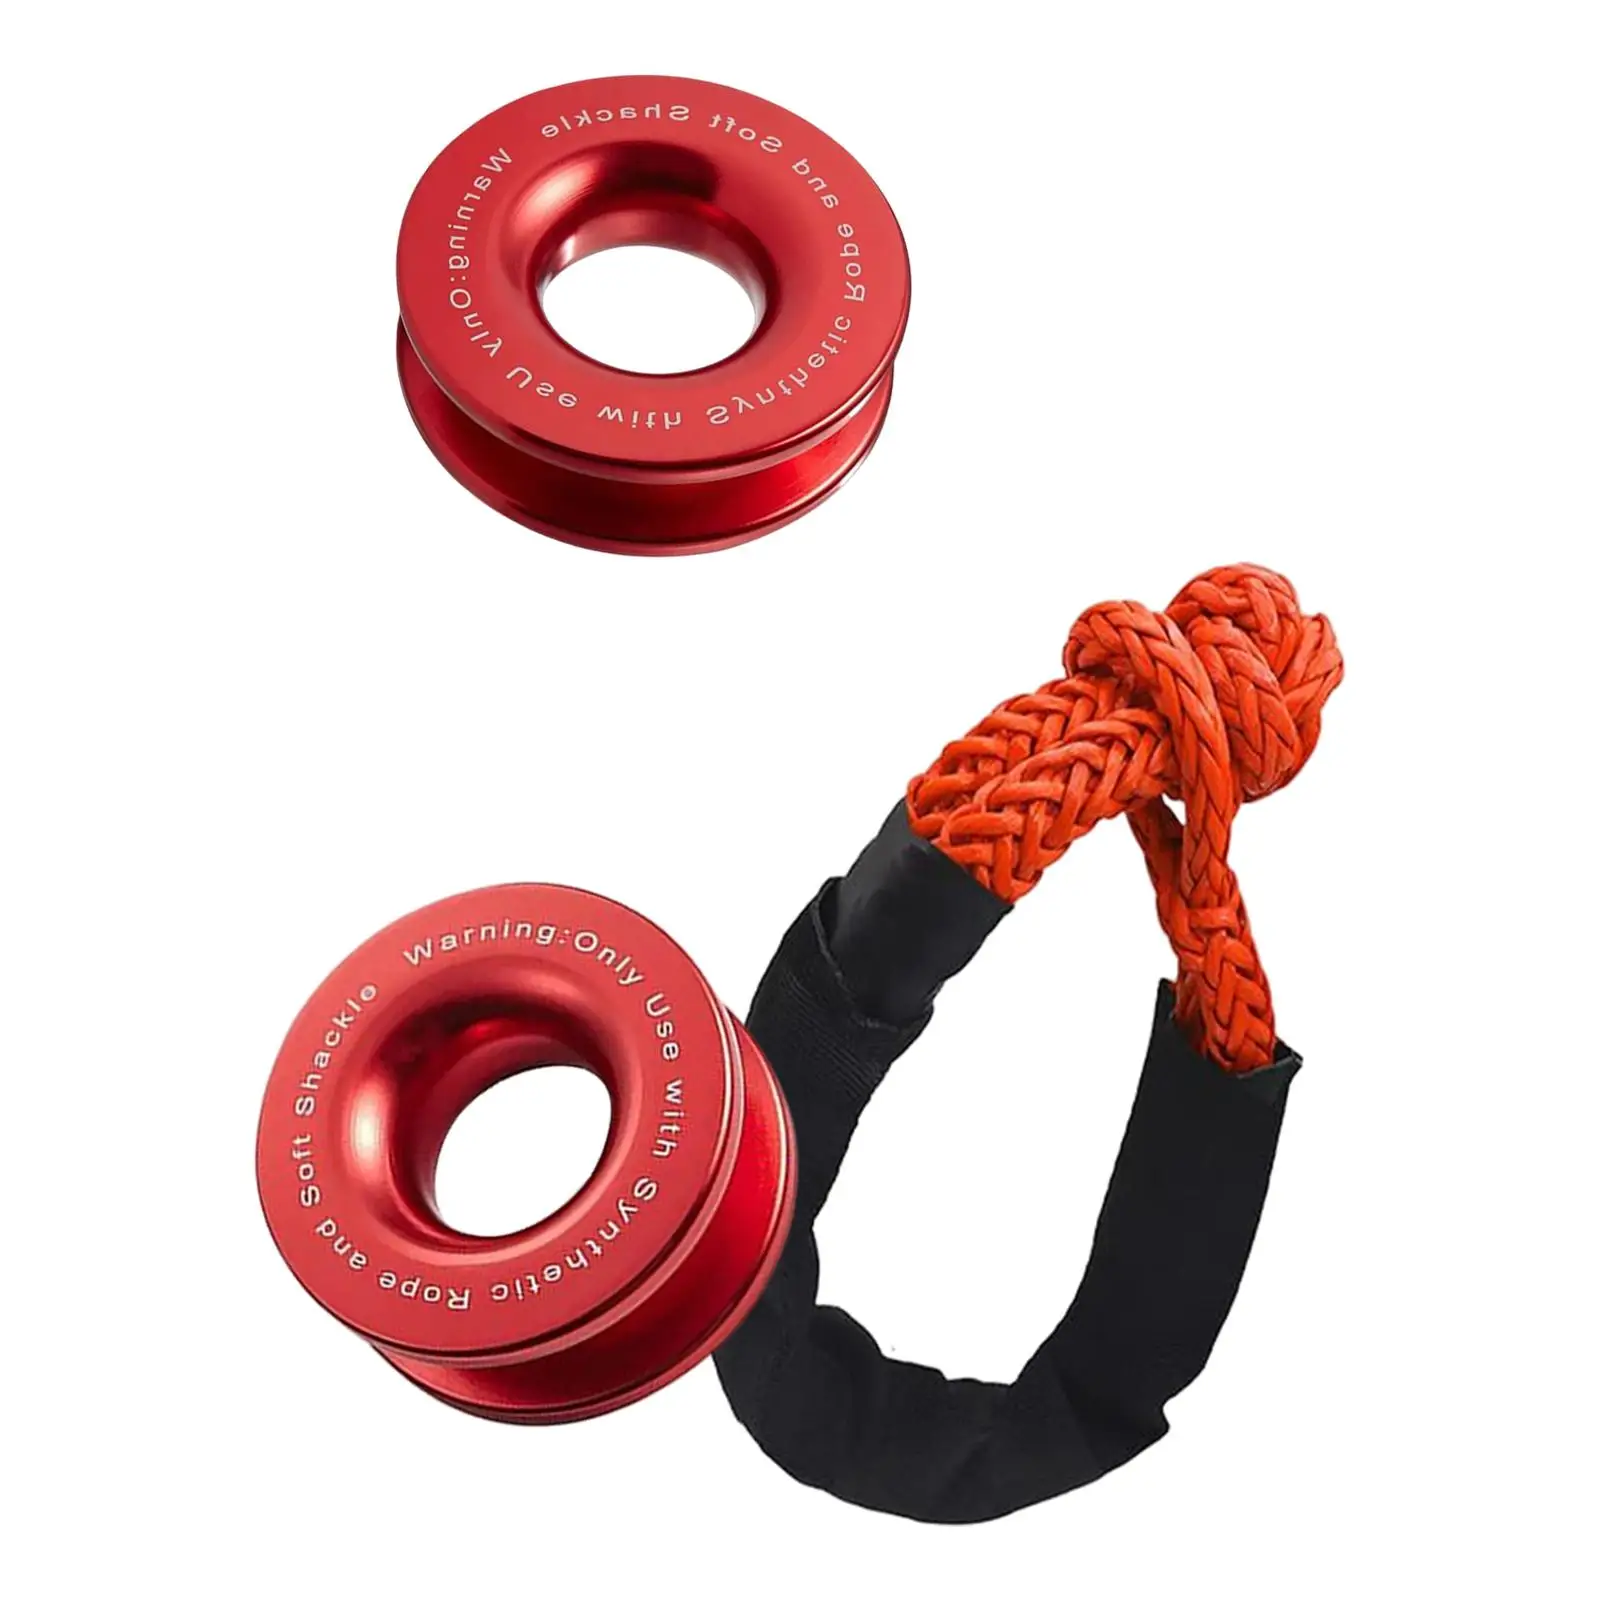 Winch Snatch recover Ring 55000lbs Vehicles Towing Durable Car Breakdowns Soft Shackle Depot for Cars Boat Marine